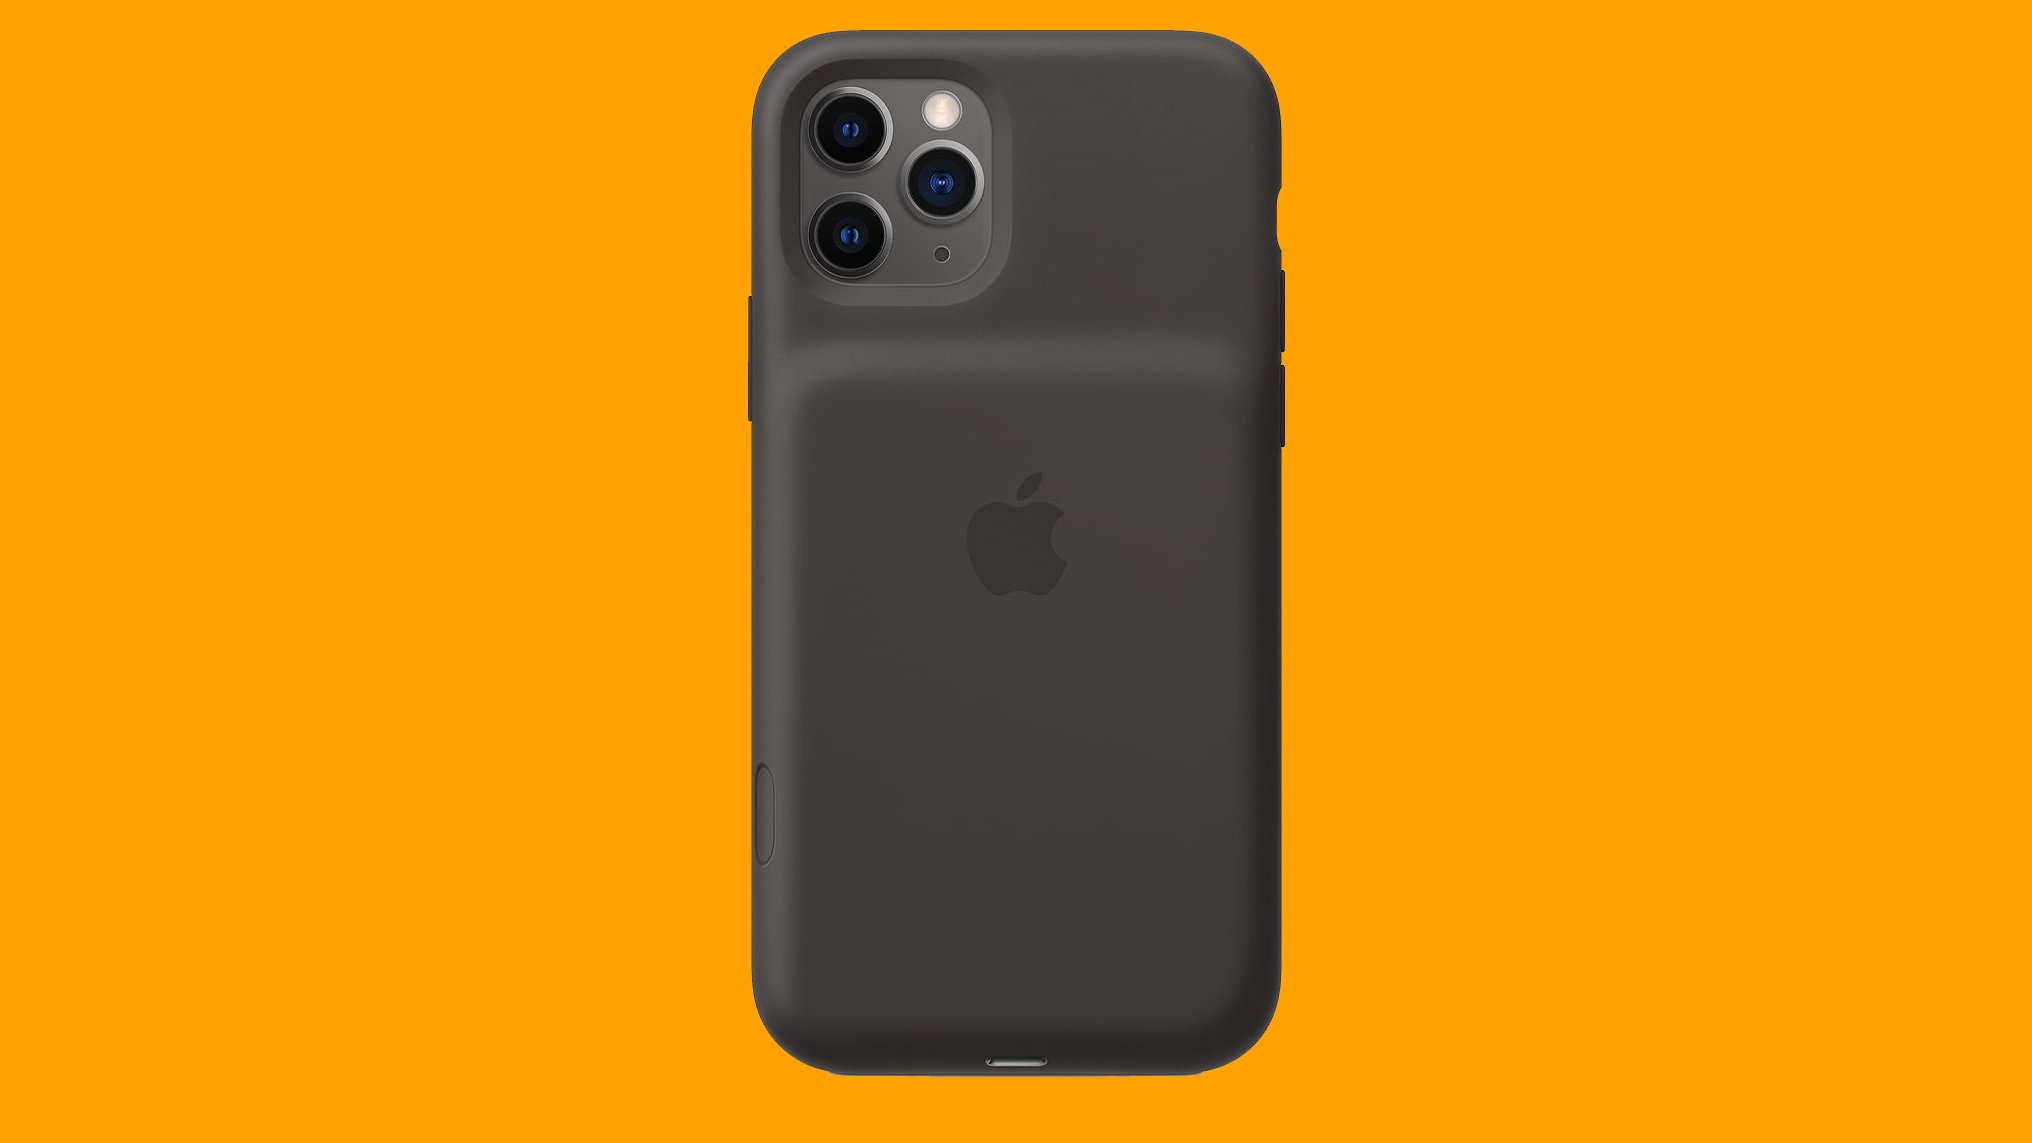 New iPhone 11 battery case from Apple adds a camera shutter button